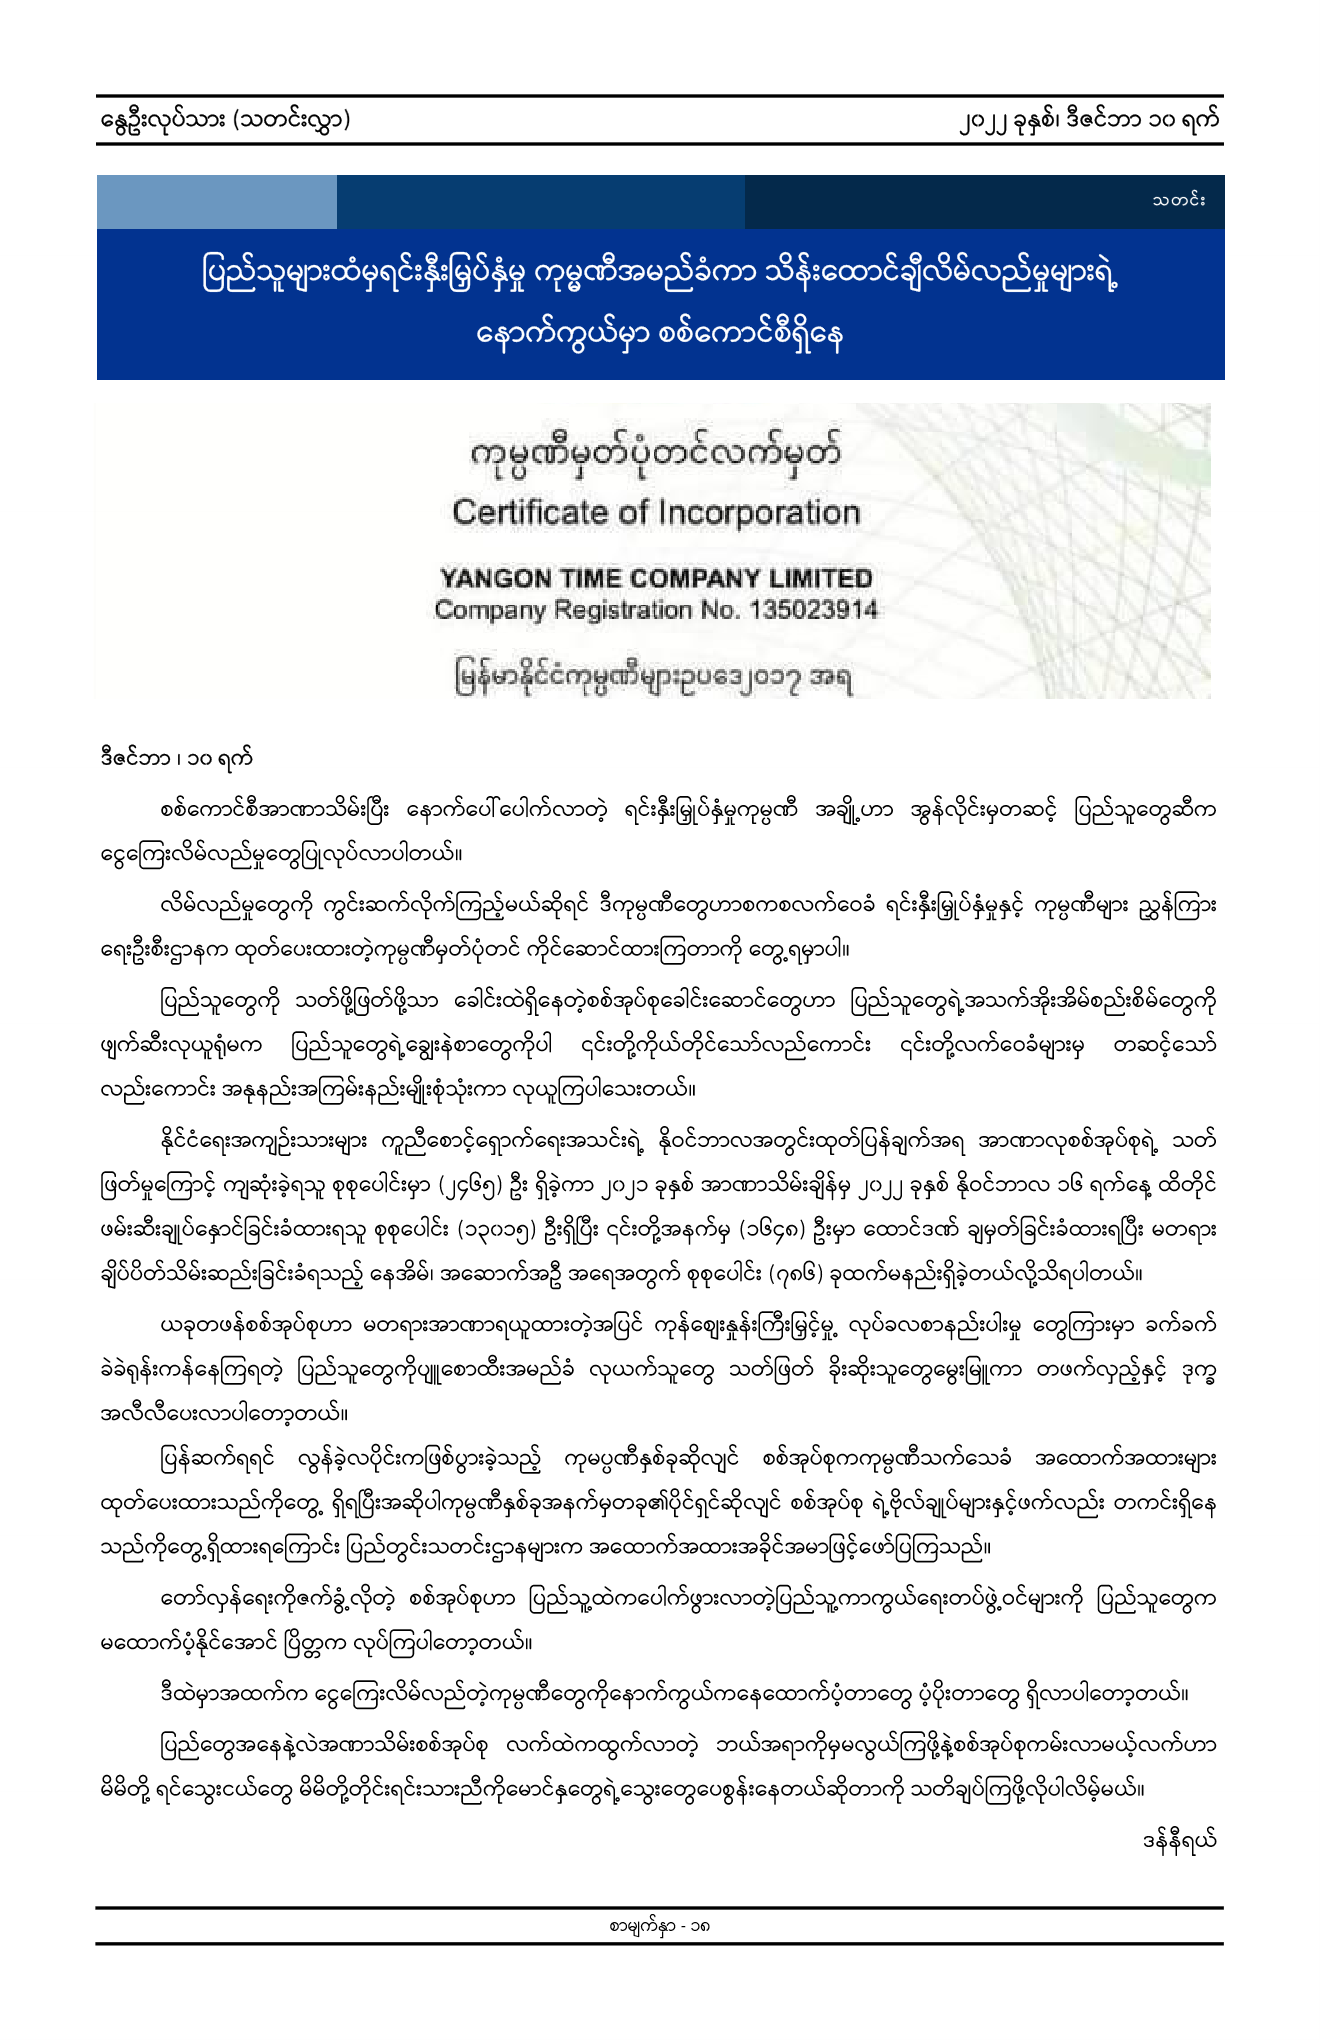 Ministry of Labour https://mol.nugmyanmar.org/my/news/vol1_no7/